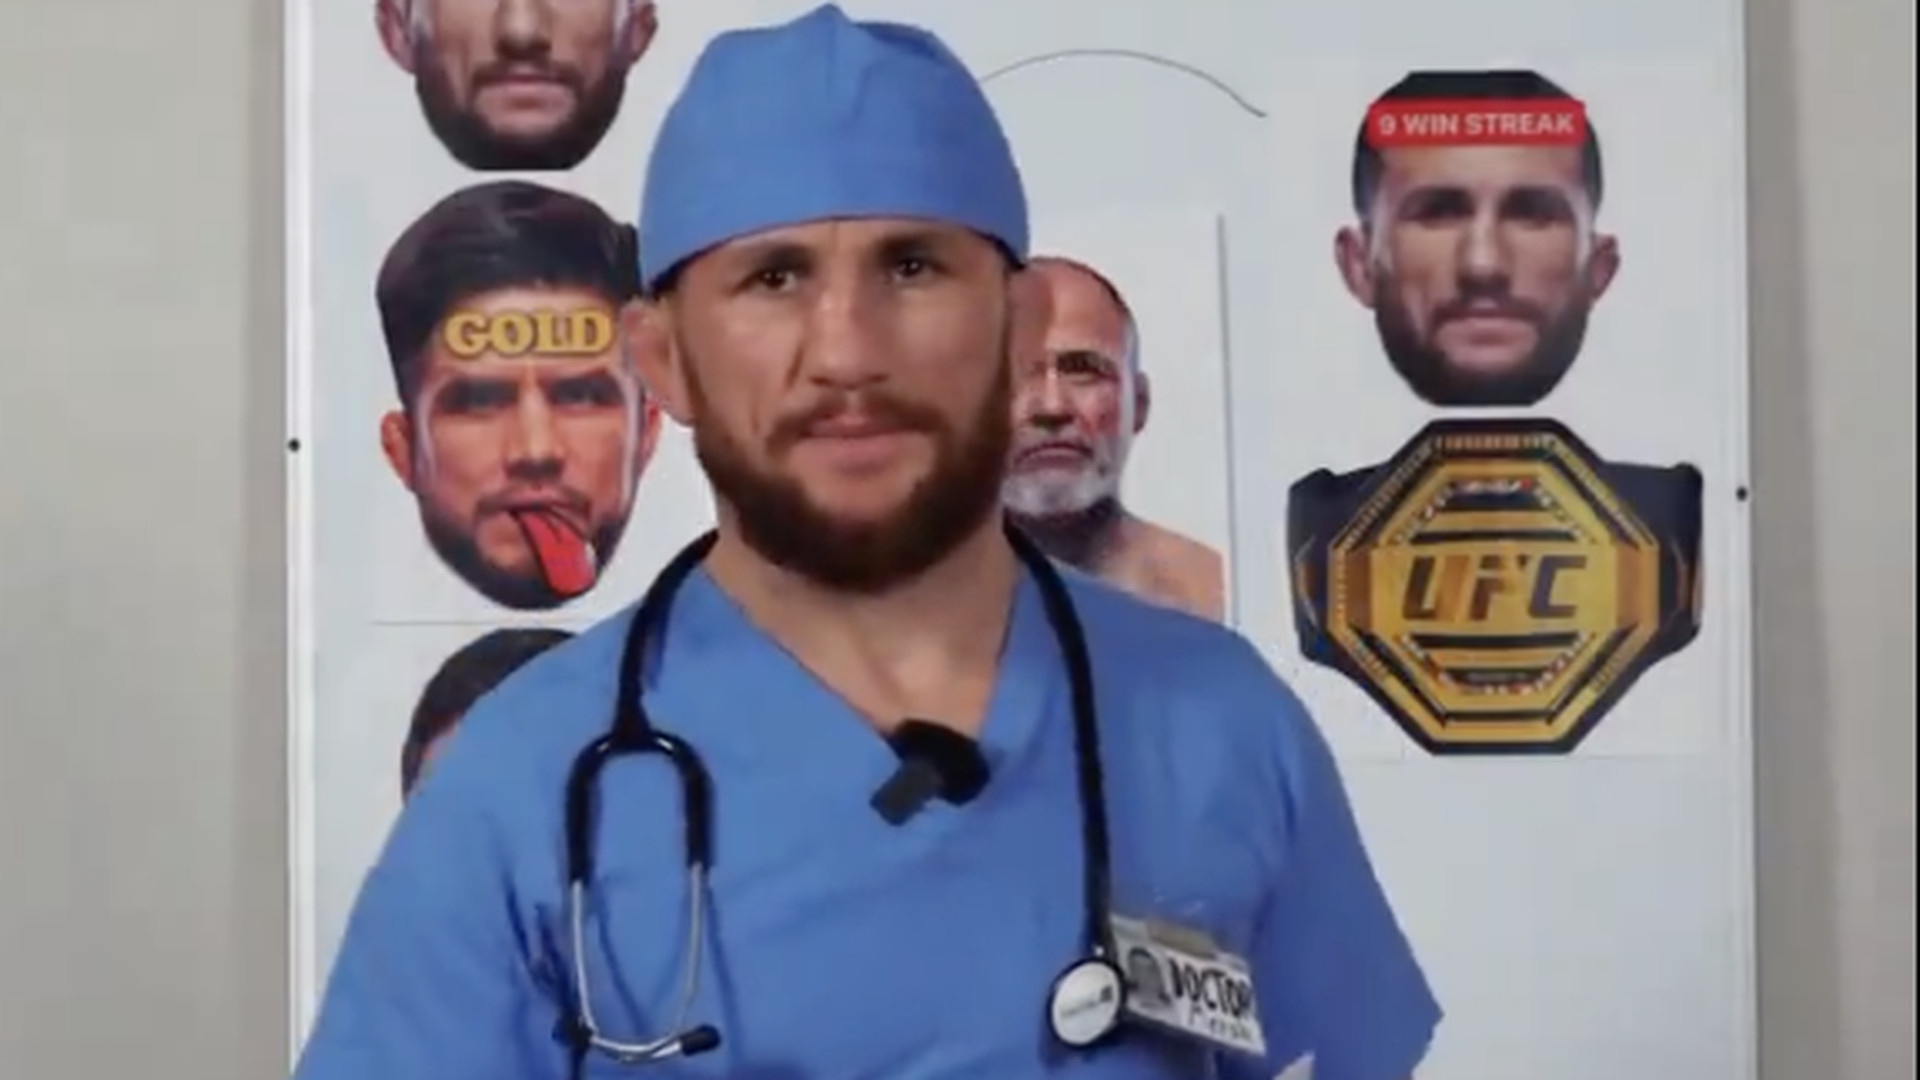 dr. merab vows to cure brain-damaged cejudo